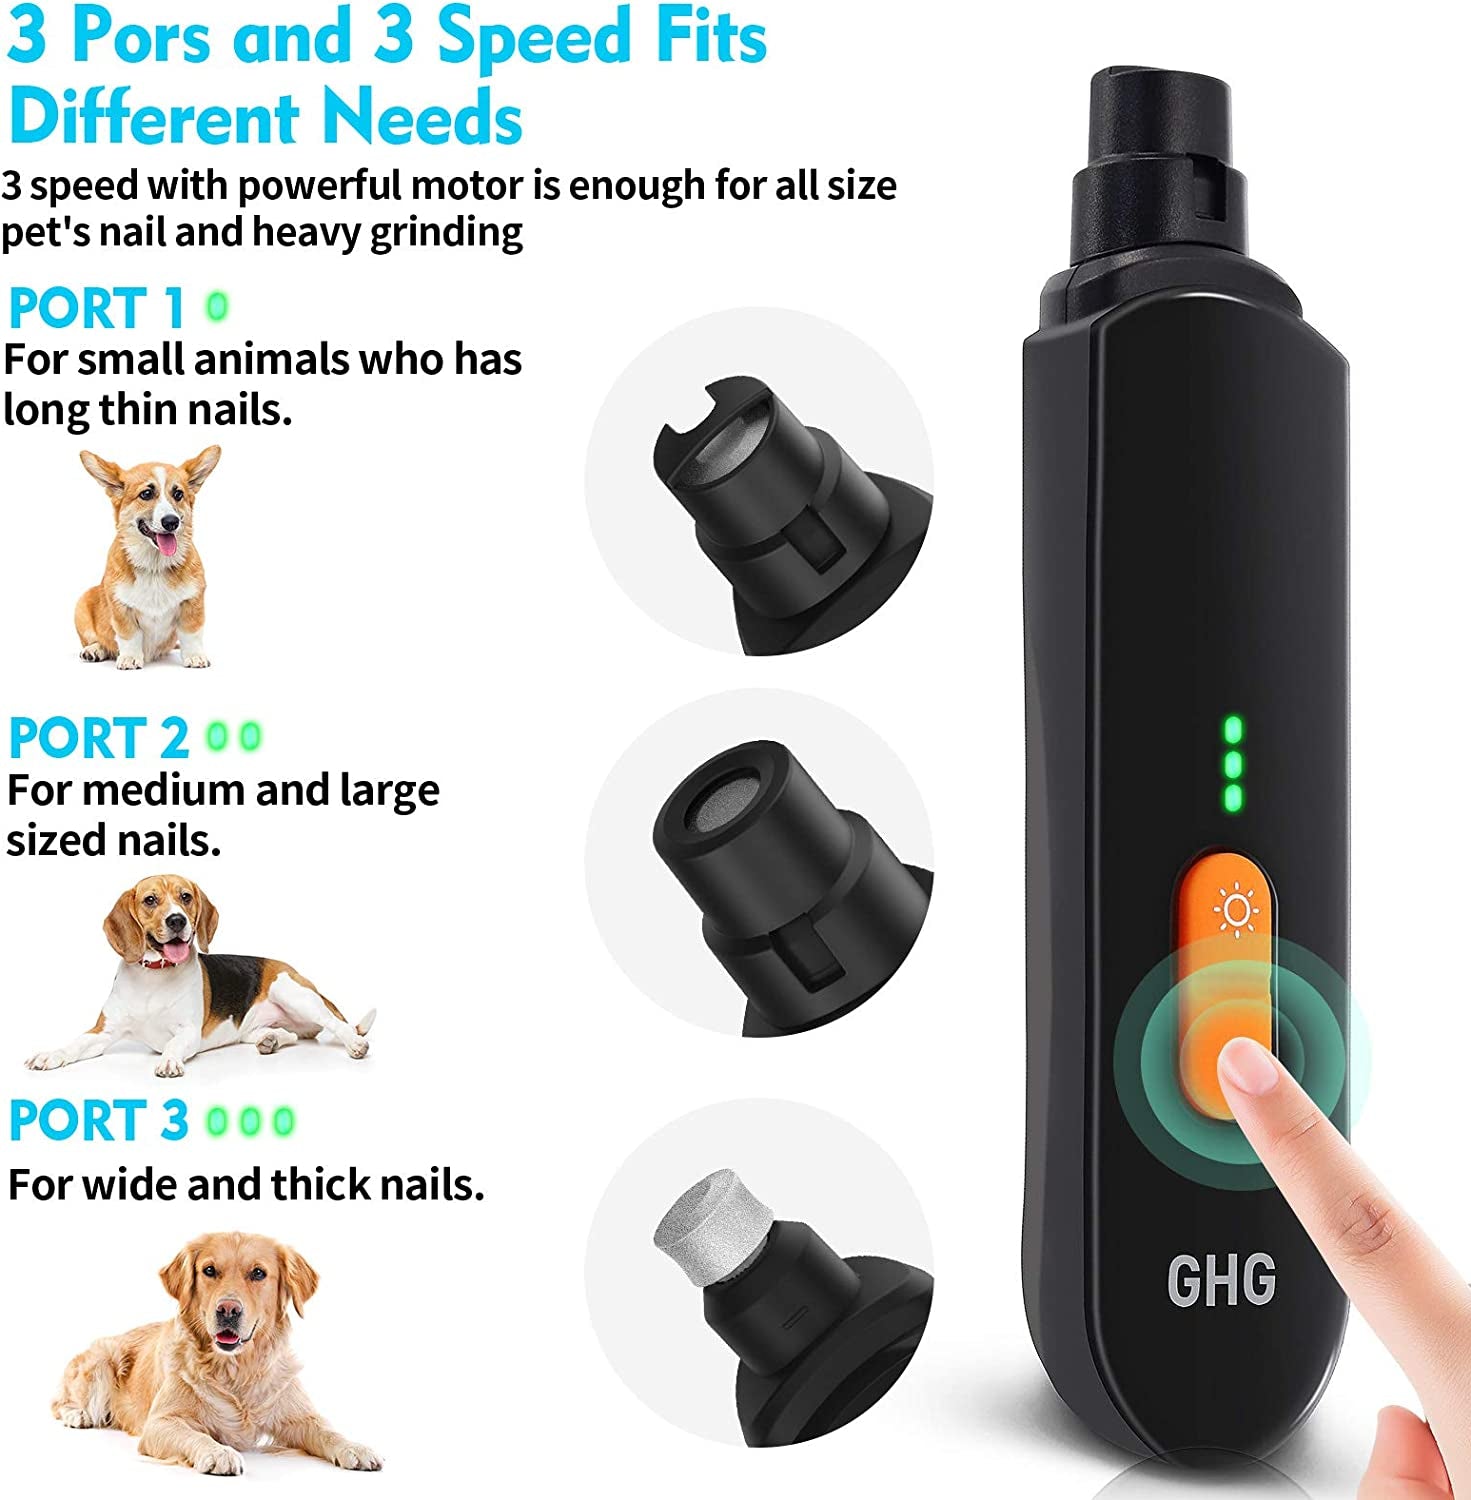 Dog Nail Grinder Upgraded - Professional Dog Nail Trimmers Rechargeable, Dog Nail Clipper for Small Medium Large Dogs Quiet, 3-Speed Pet Nail Grinders Trimmer with LED Light, Super Low Noise